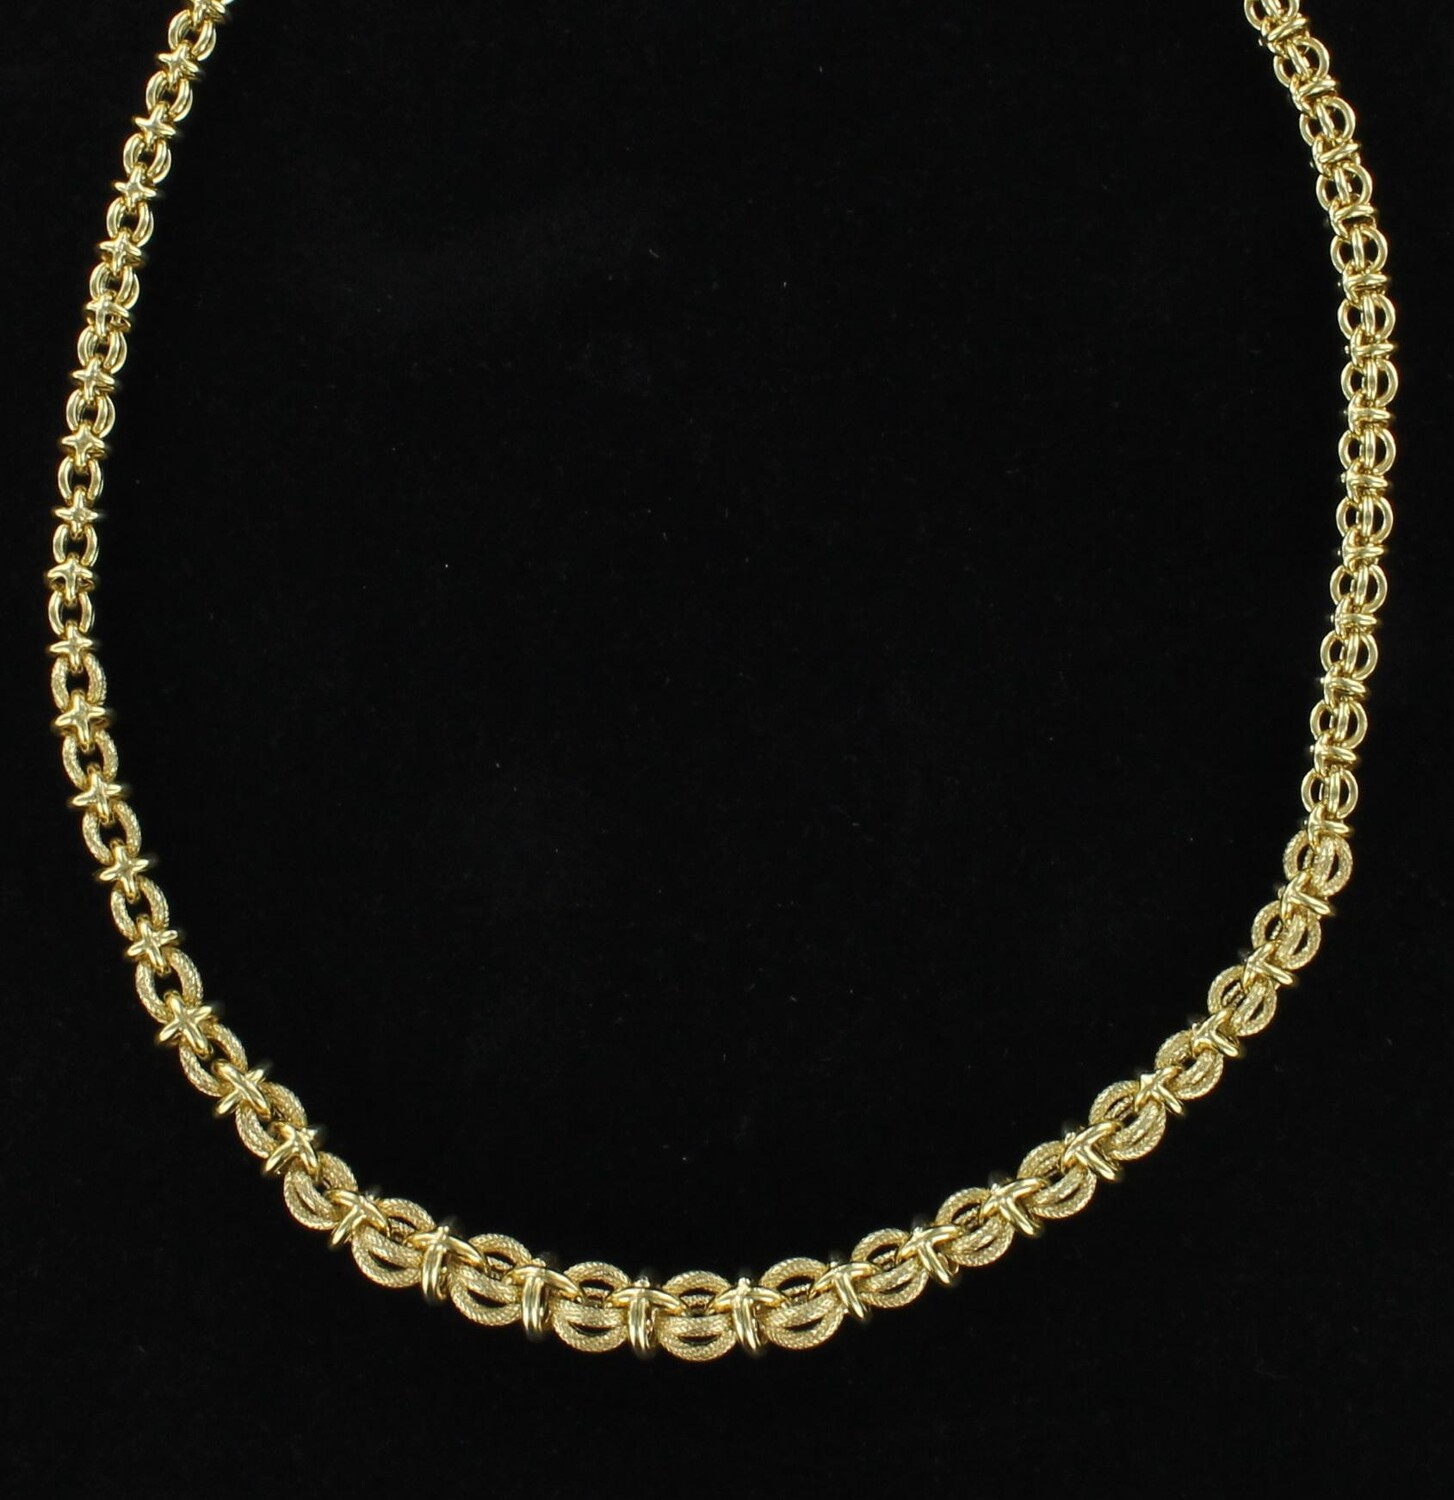 14KT YELLOW GOLD CHAIN